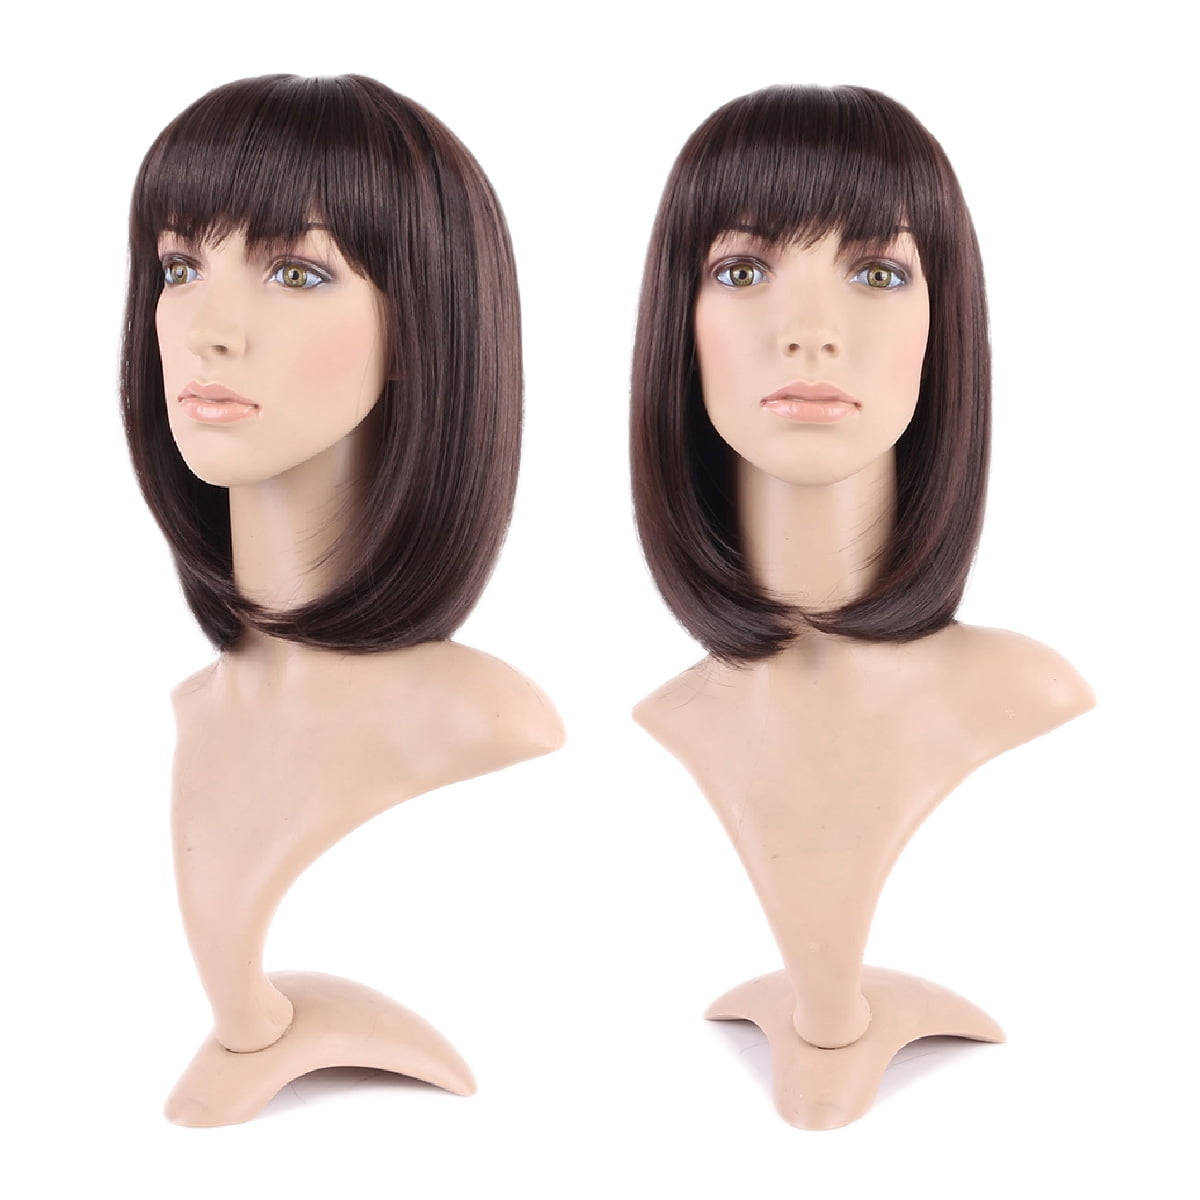 S Noilite Long Curly Synthetic Wig With Bangs Short Hair Wigs Heat Resistant Full Wig Full Head 